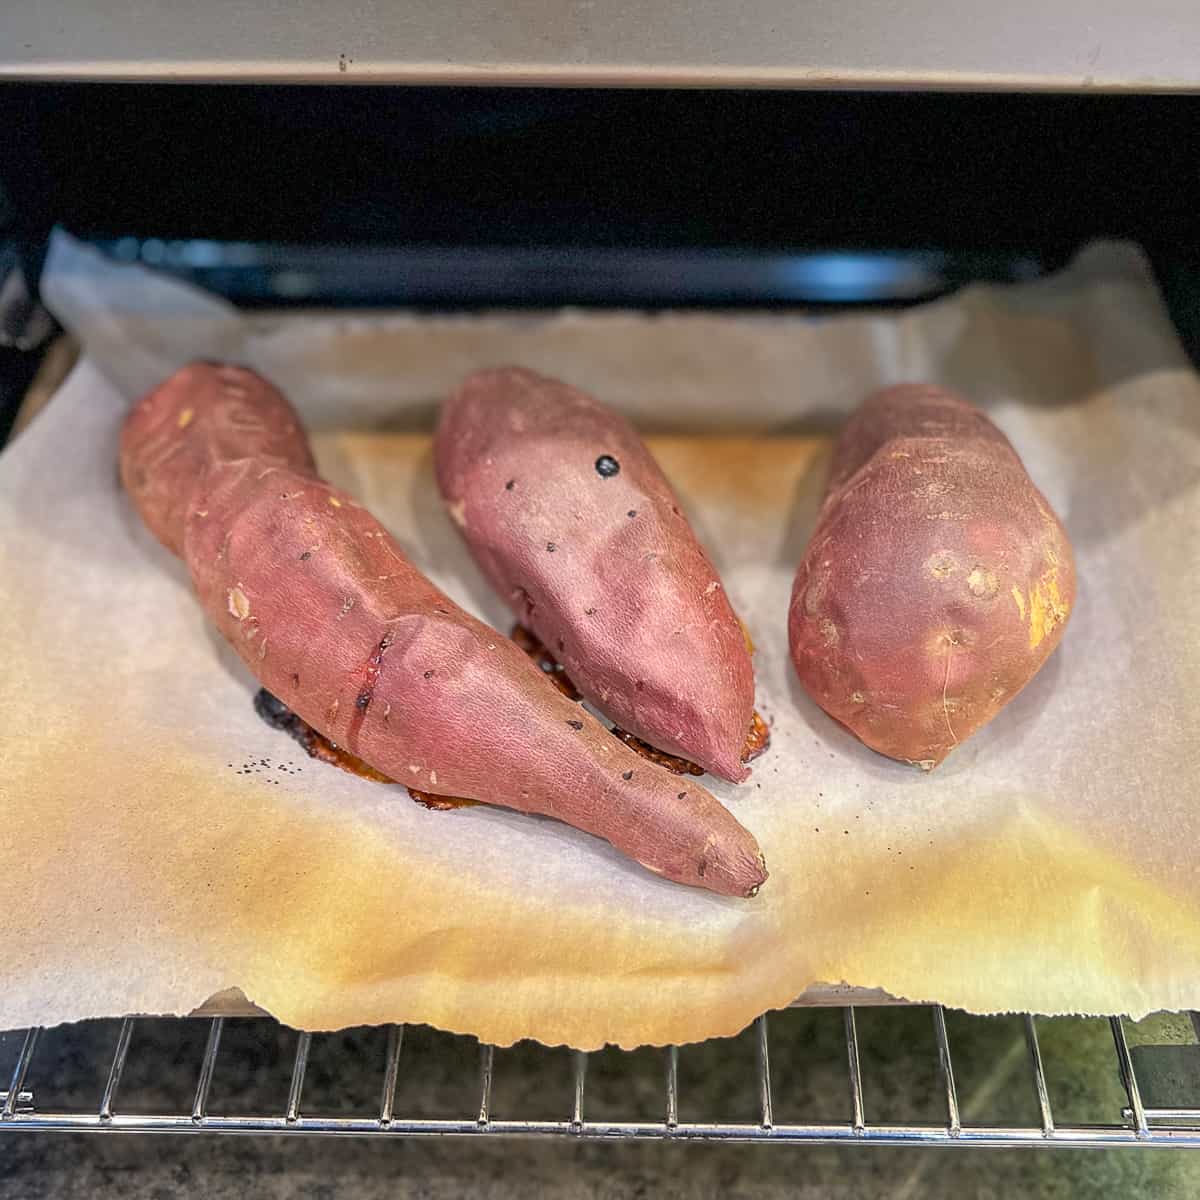 Three baked sweet potatoes on parchment lined baking sheet cooling to room temperature